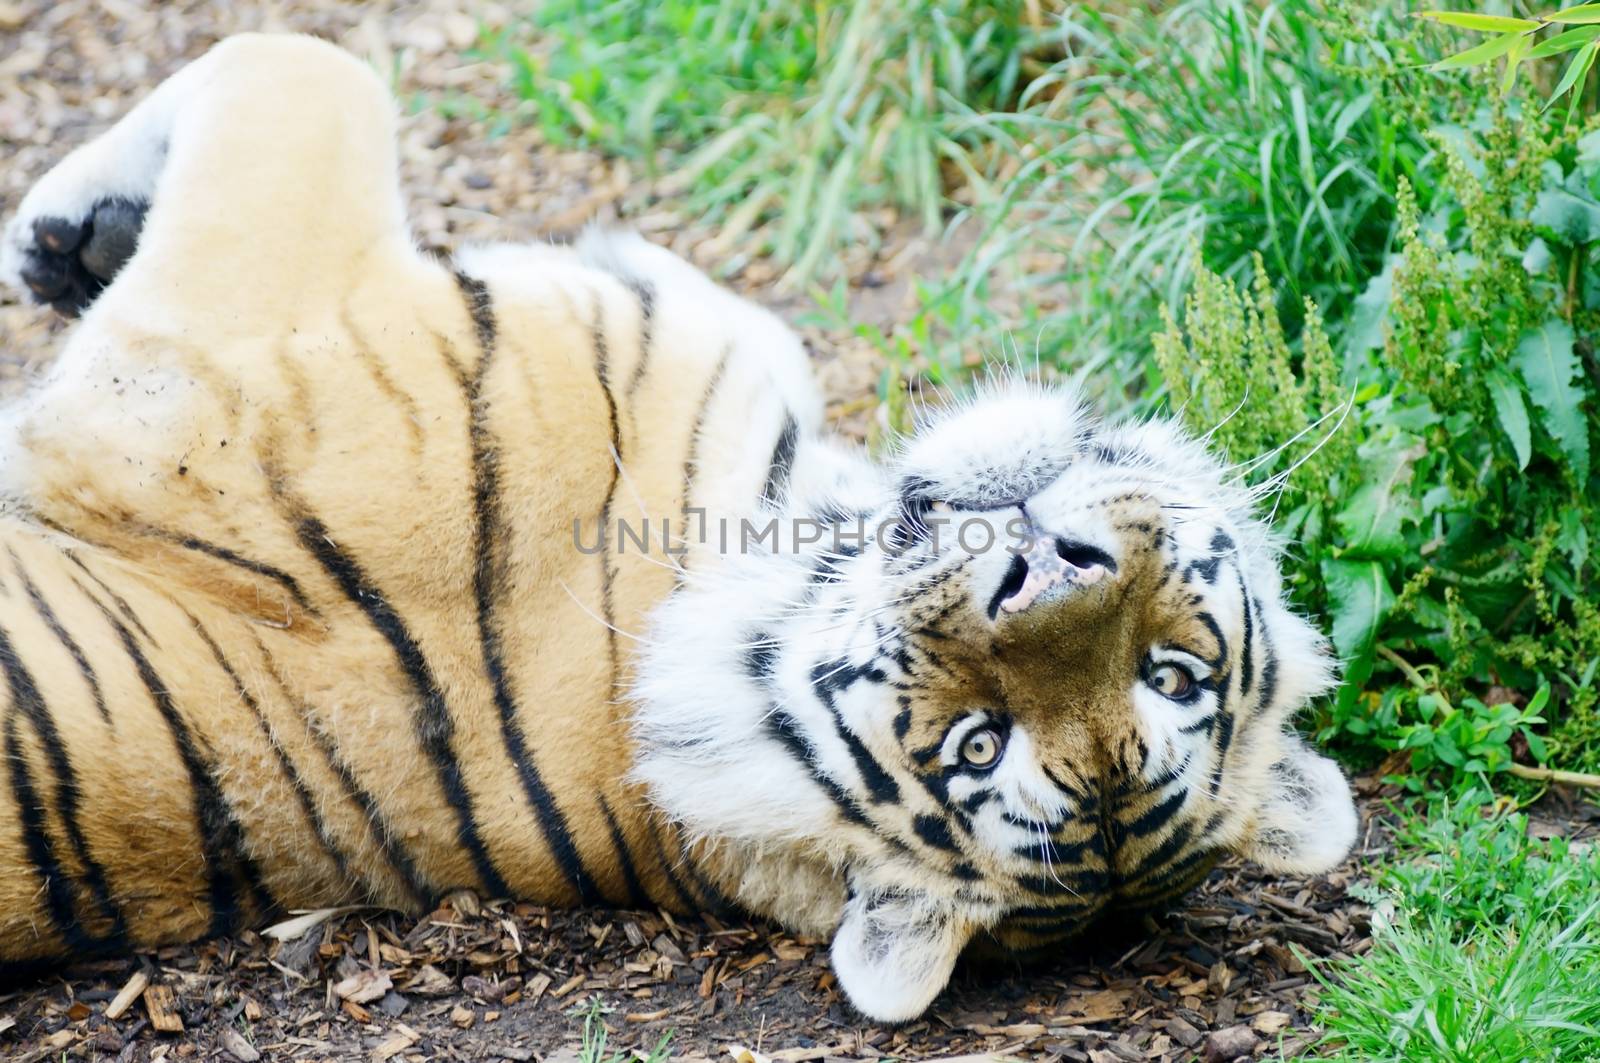 Tiger rolling on the ground in playful mood